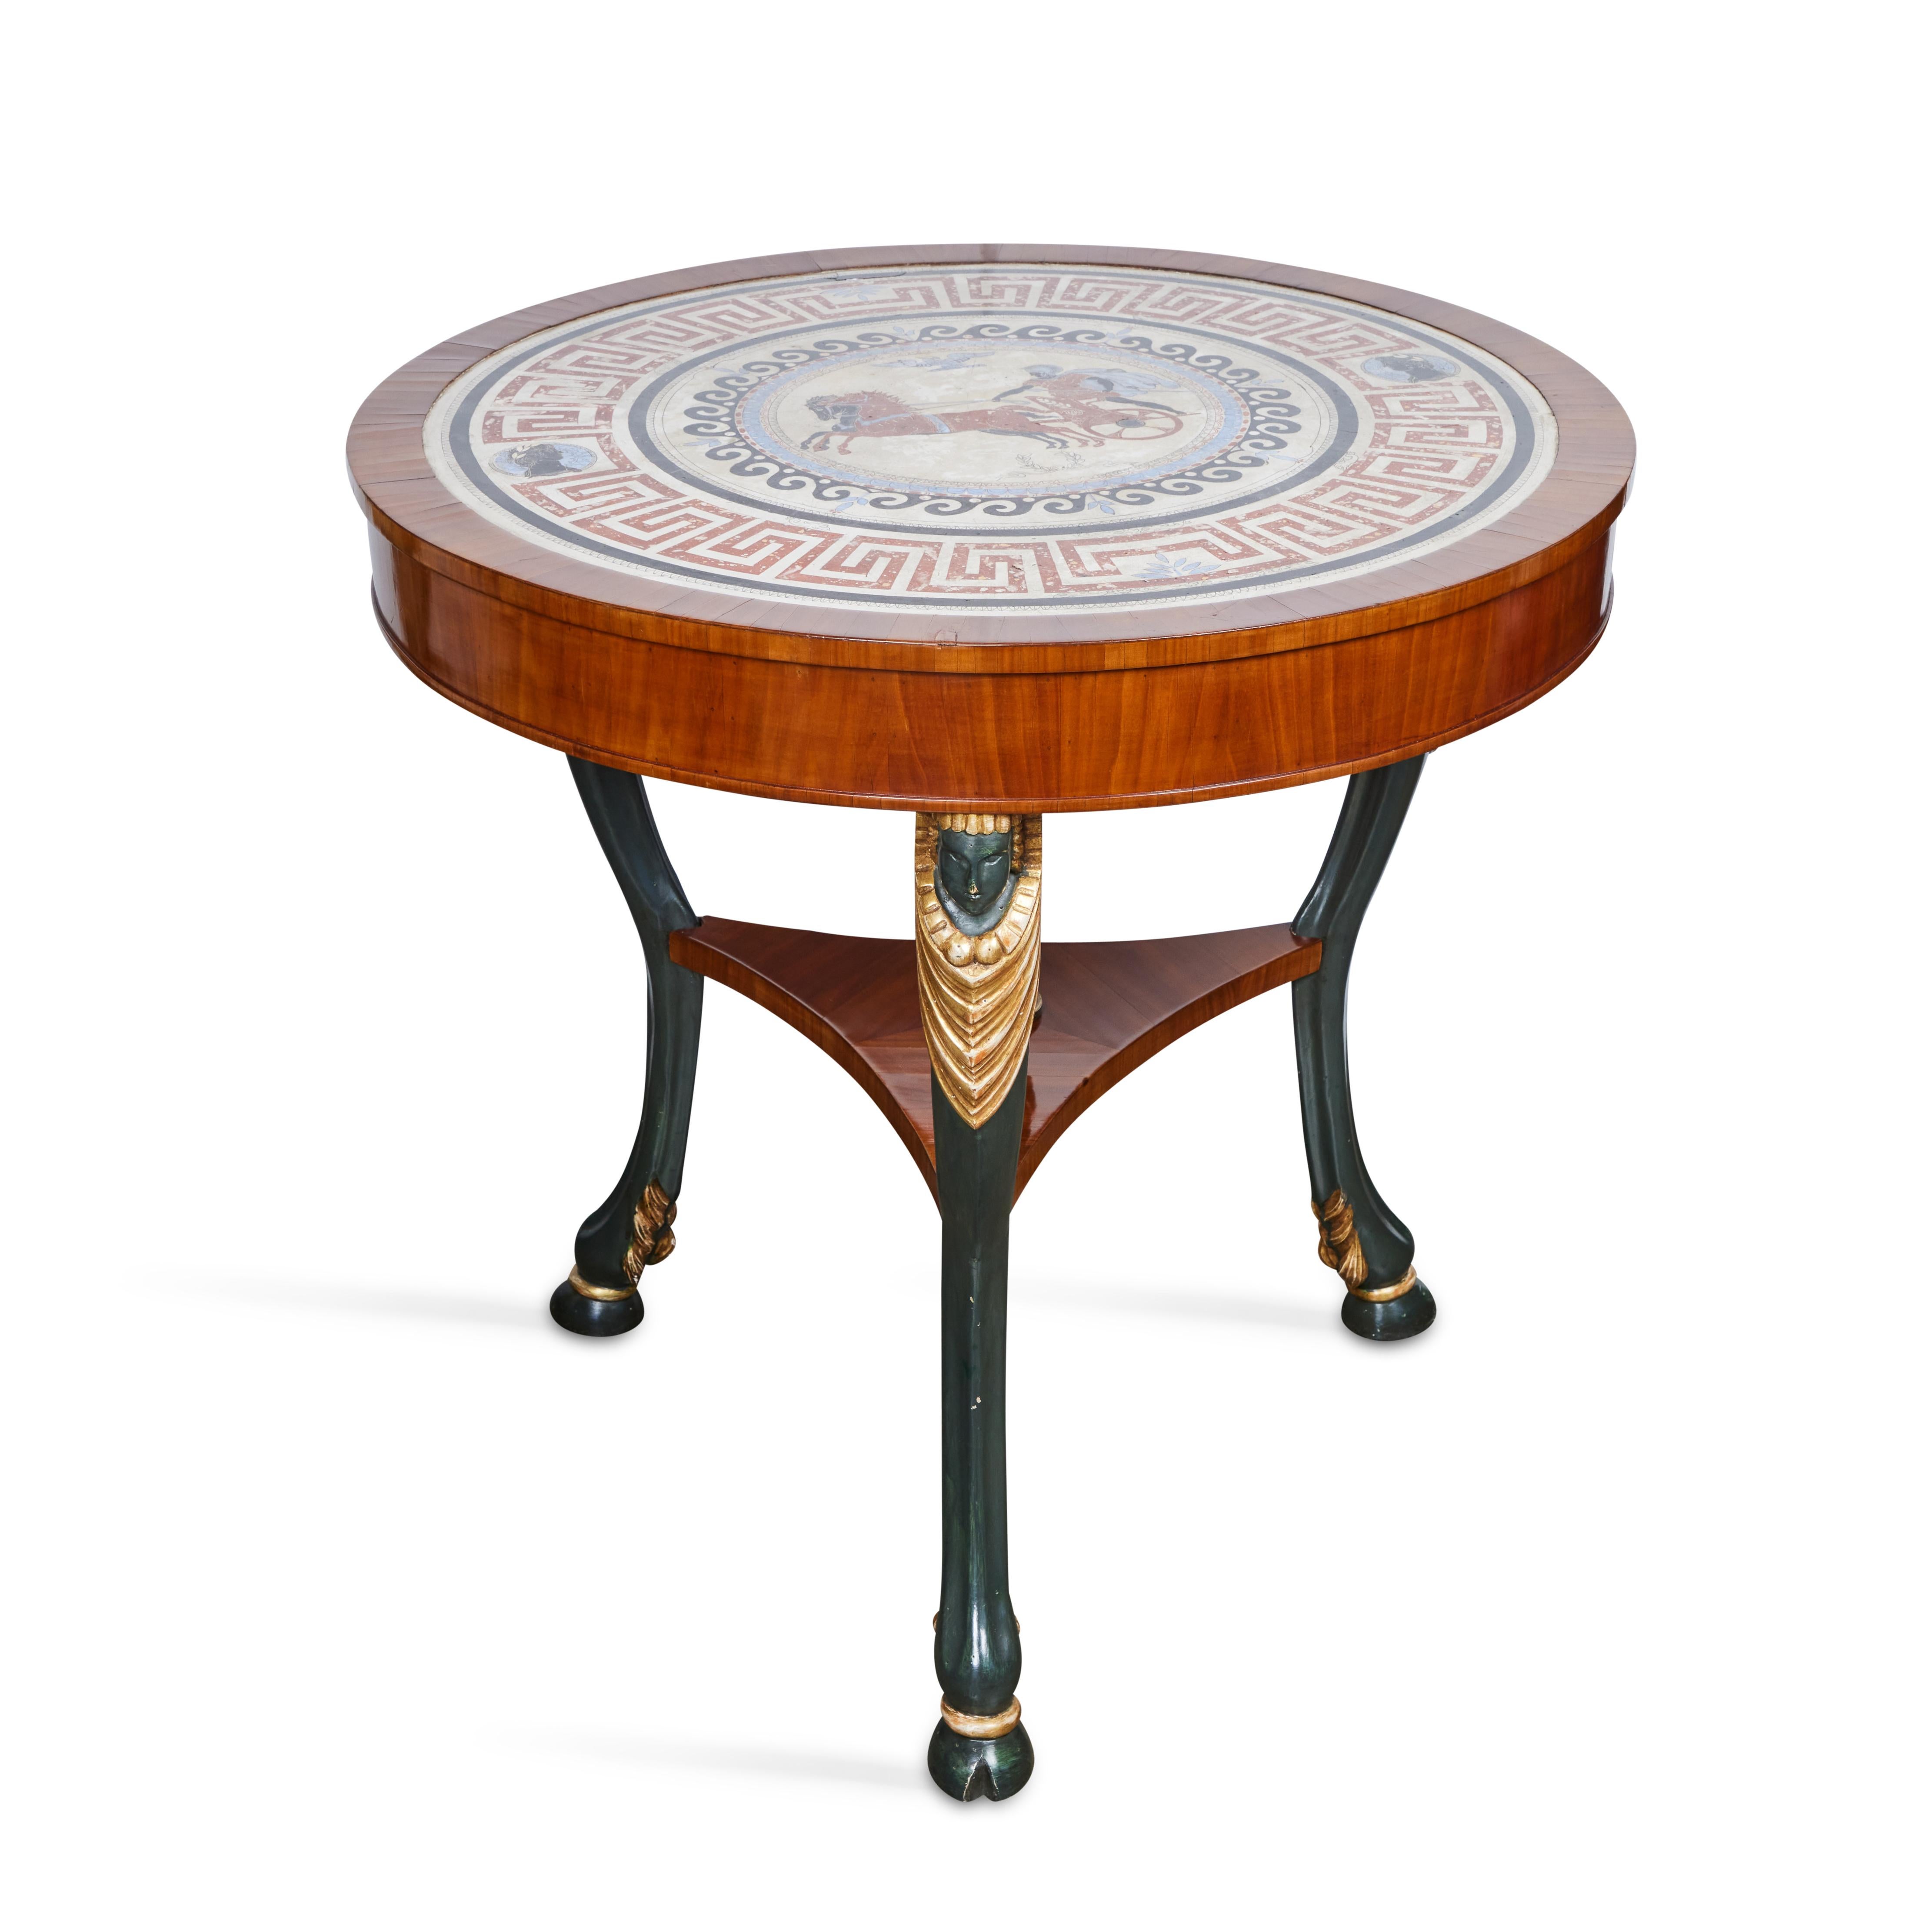 A left and right pair of walnut veneered, painted and gilded tables with scagliola inset tops featuring horse and chariot designs, surrounded by a classic Greek key border and Cesar profile medallions.  From the area of Genoa, Italy.    Sold